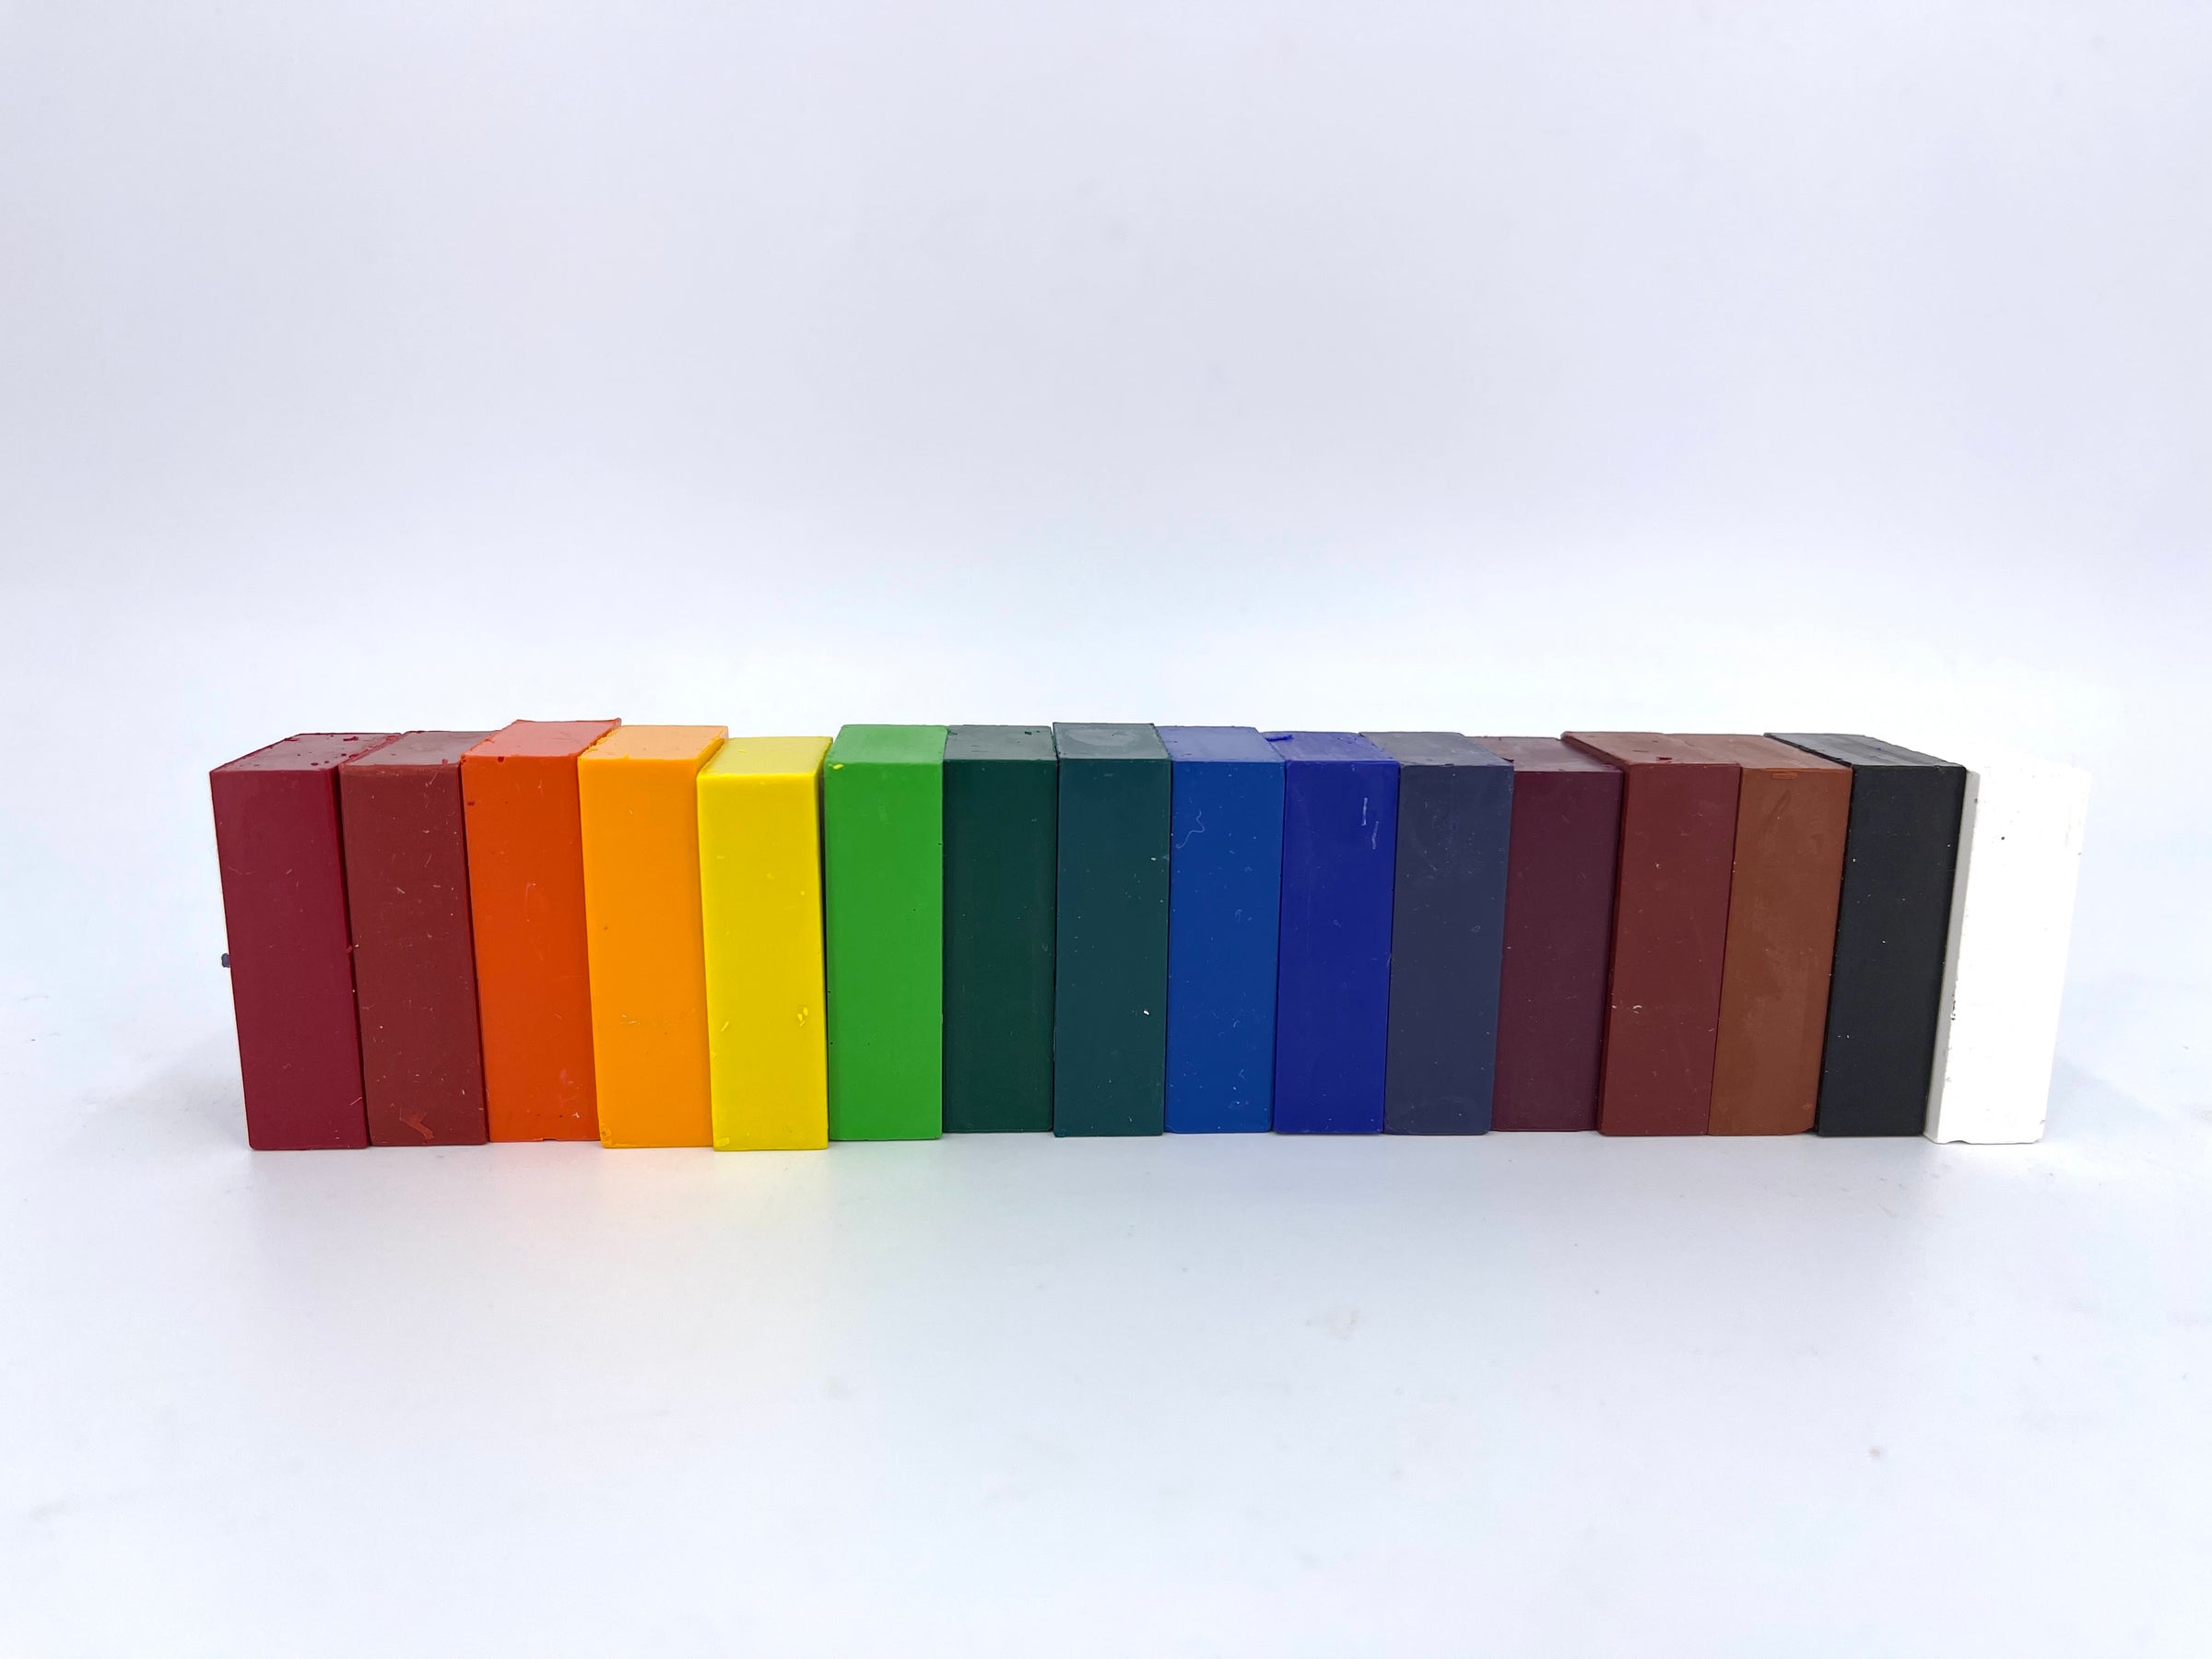 The Mindful Home: The Truth About Stockmar Crayons Ingredients